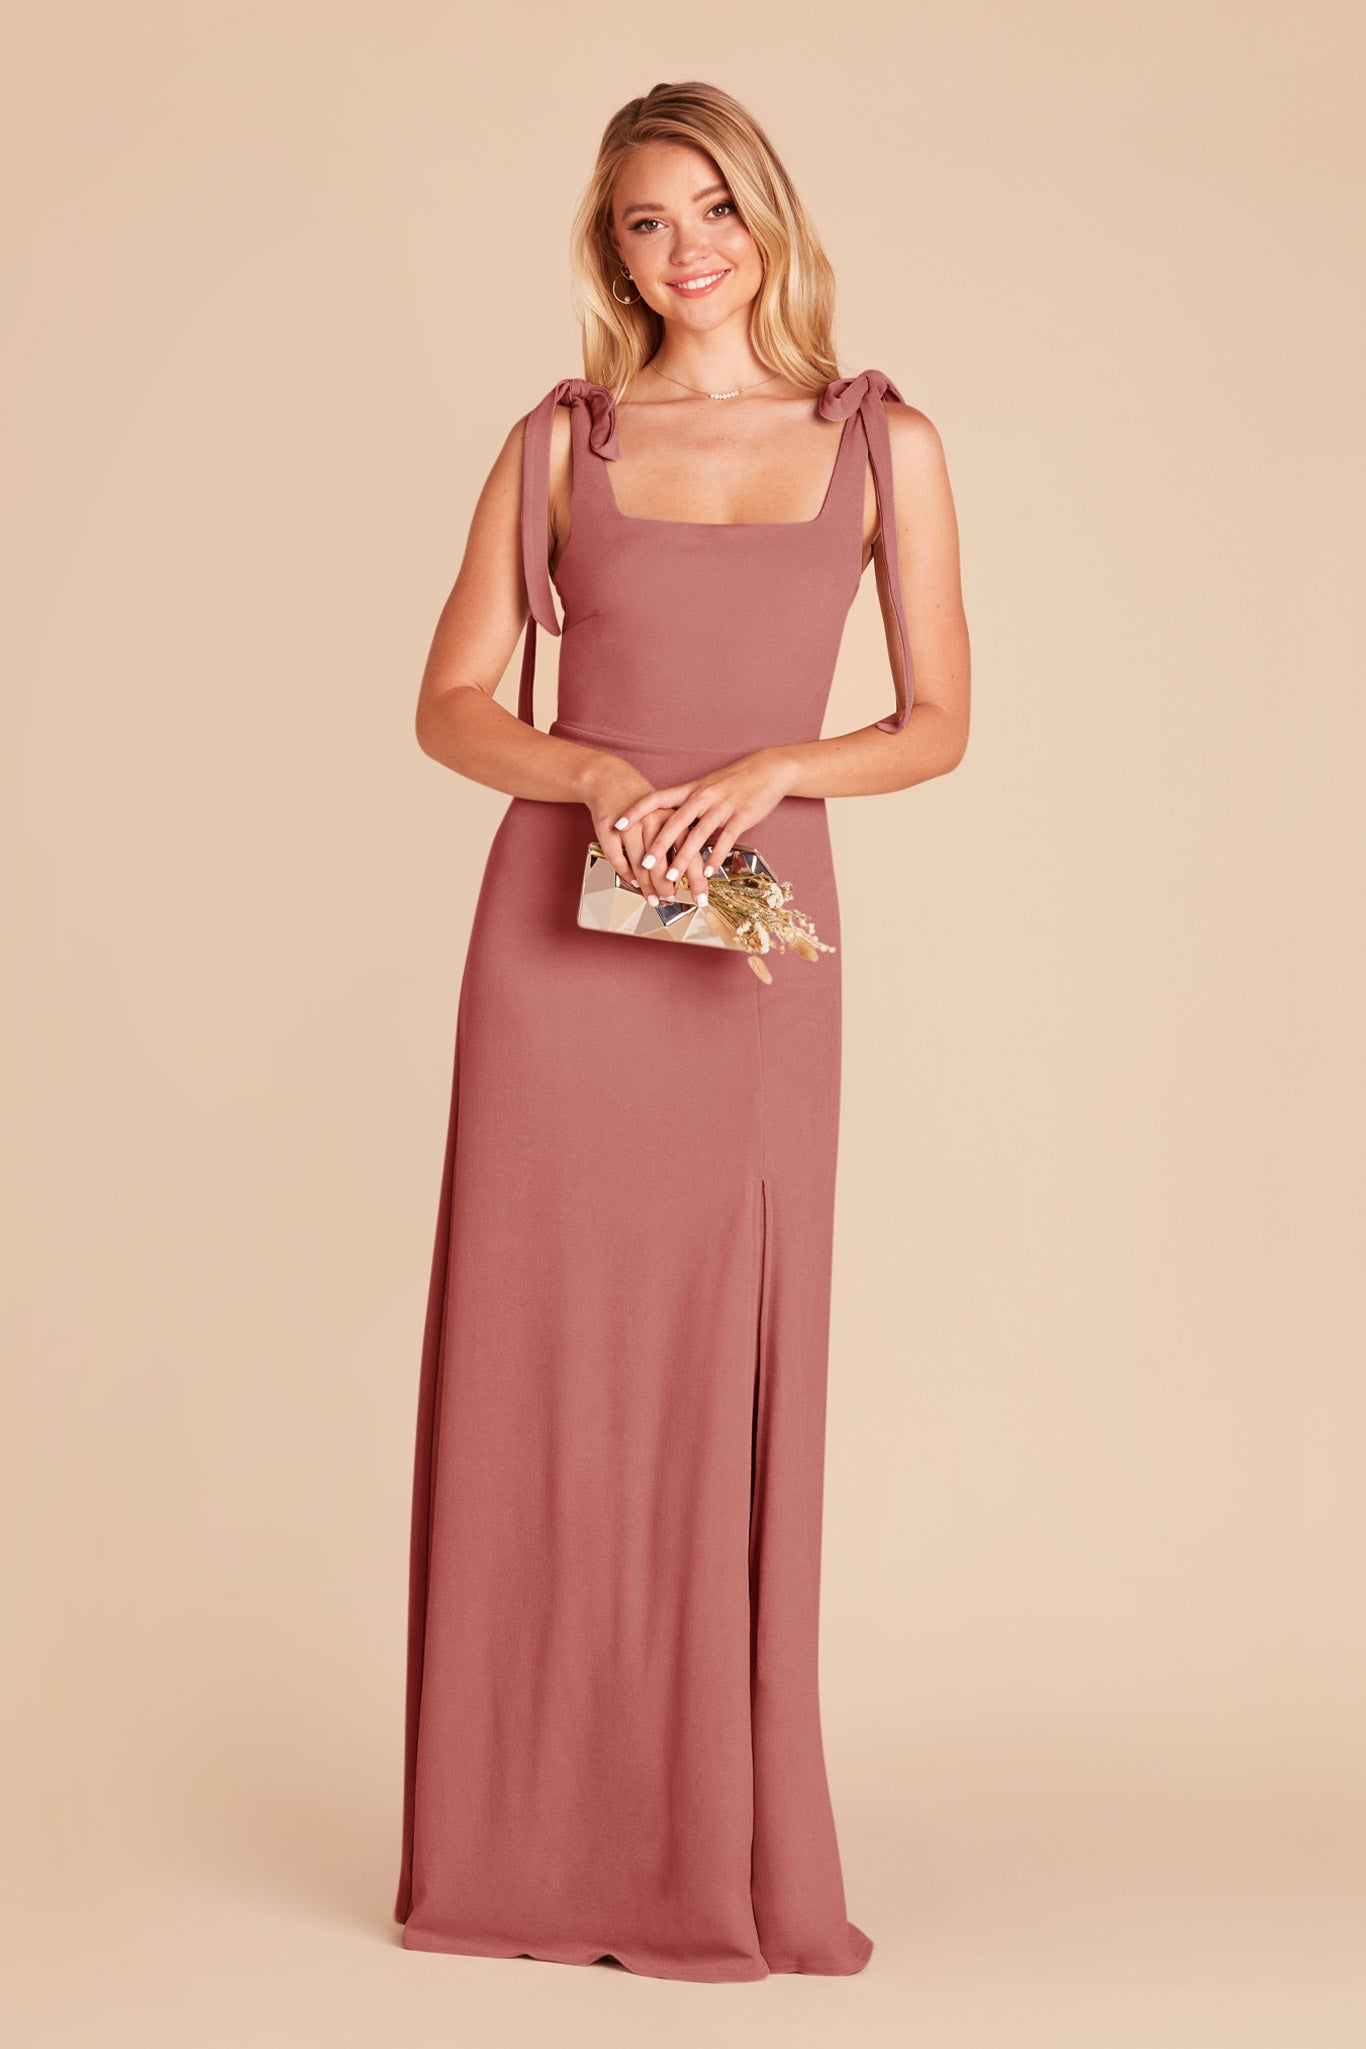 Mulberry Crepe Dress by Birdy Grey